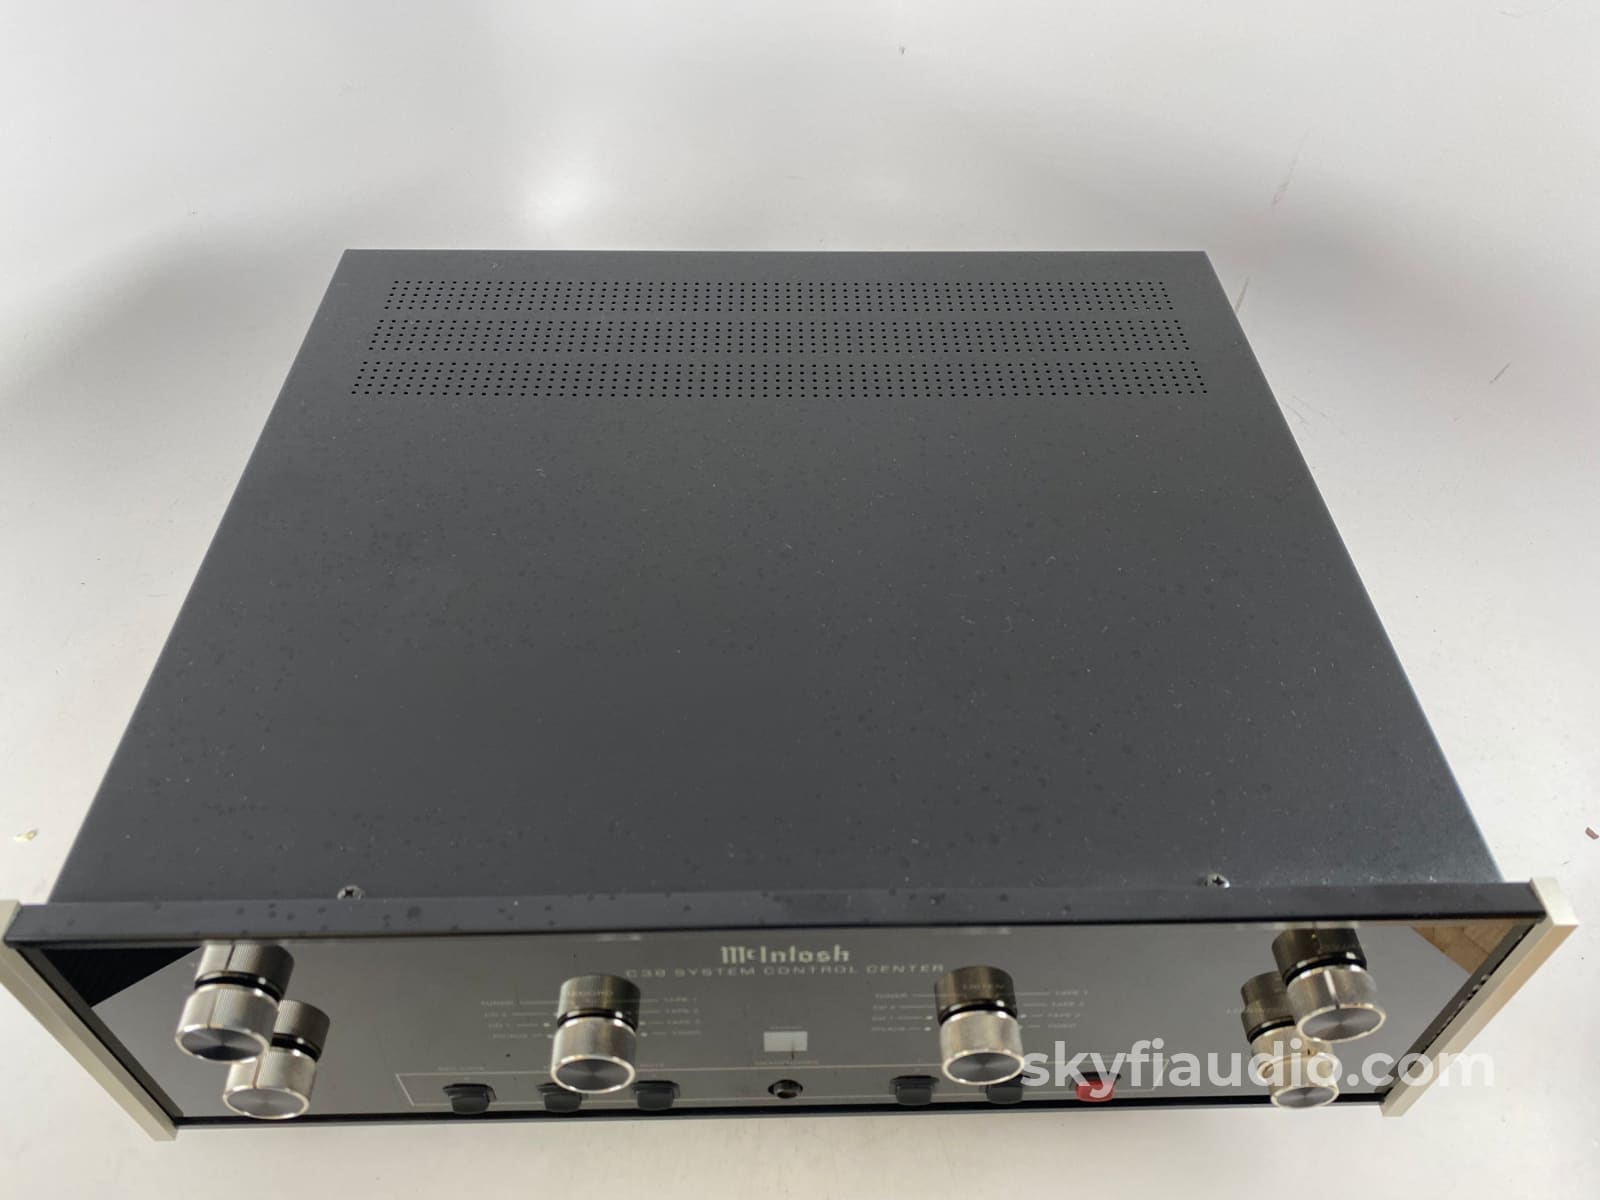 Mcintosh C38 Preamplifier Full Featured Including Phono Stage And Balanced Outputs